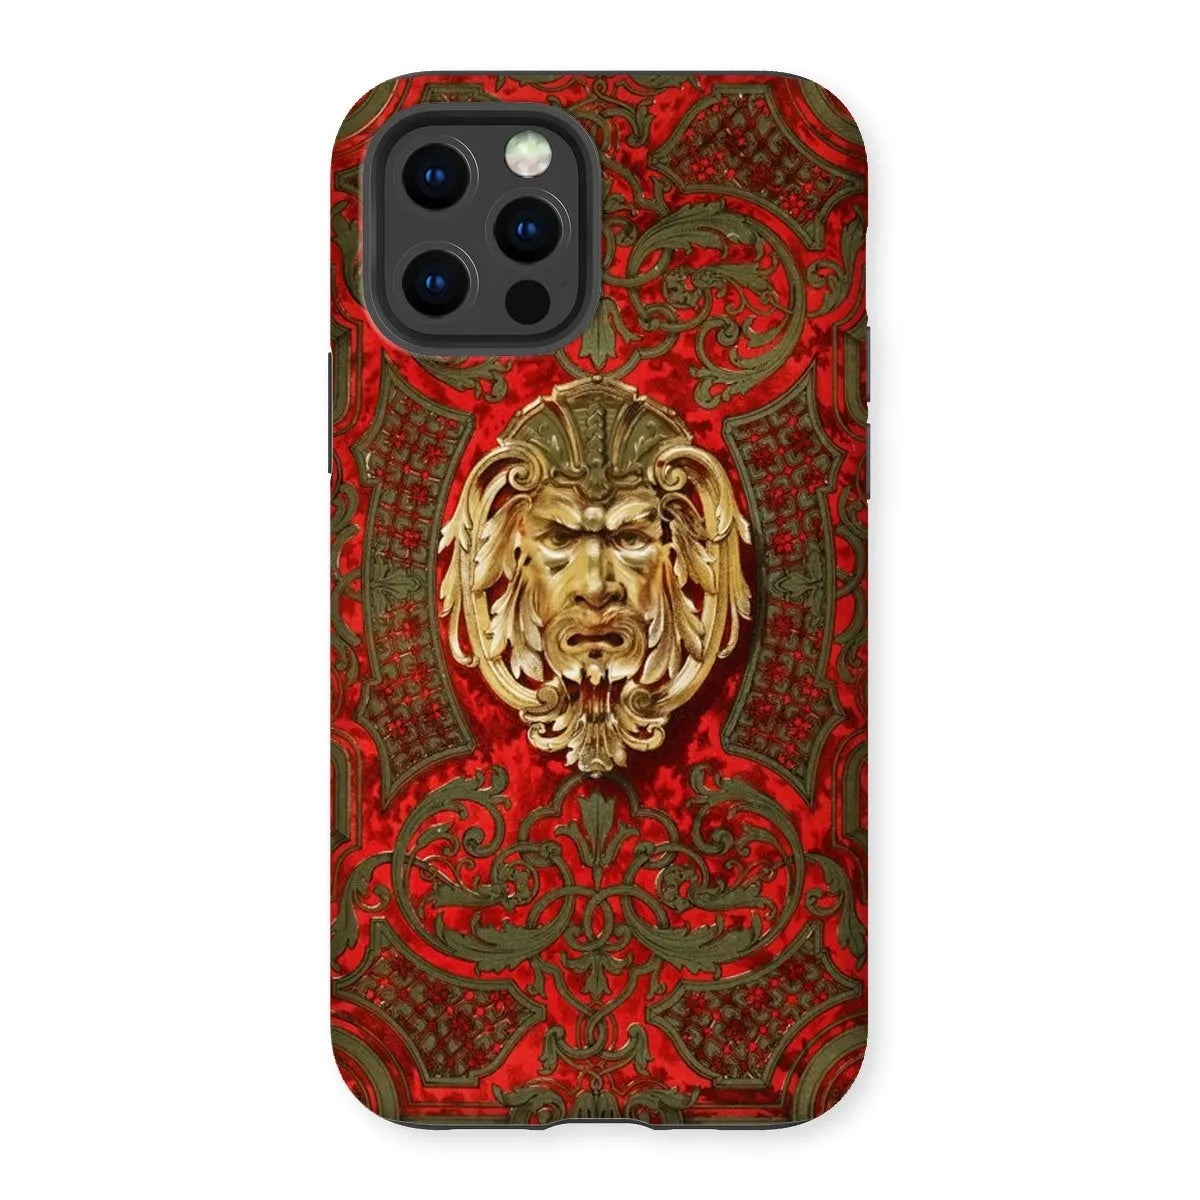 Panel In Buhl Victorian Art Phone Case - Matthew Digby Wyatt - Iphone 12 Pro / Matte - Mobile Phone Cases - Aesthetic